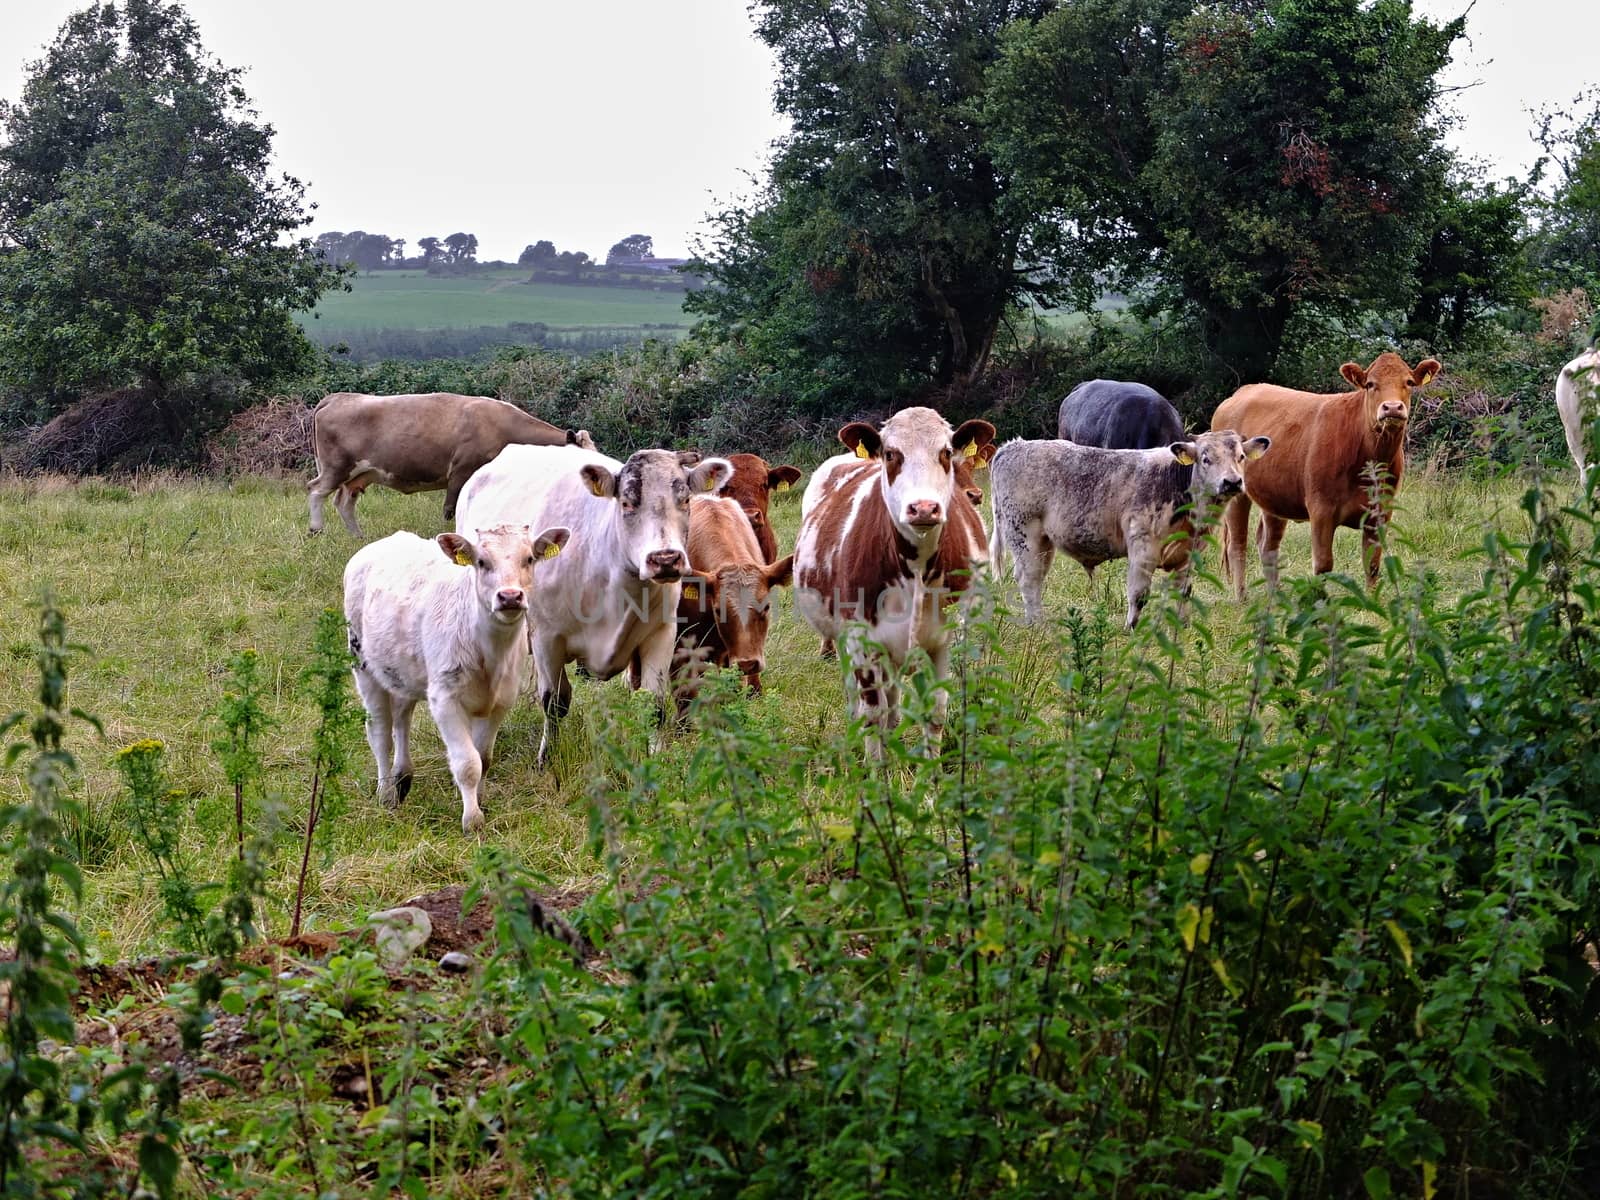 Cows and calves are grazing on the meadow.